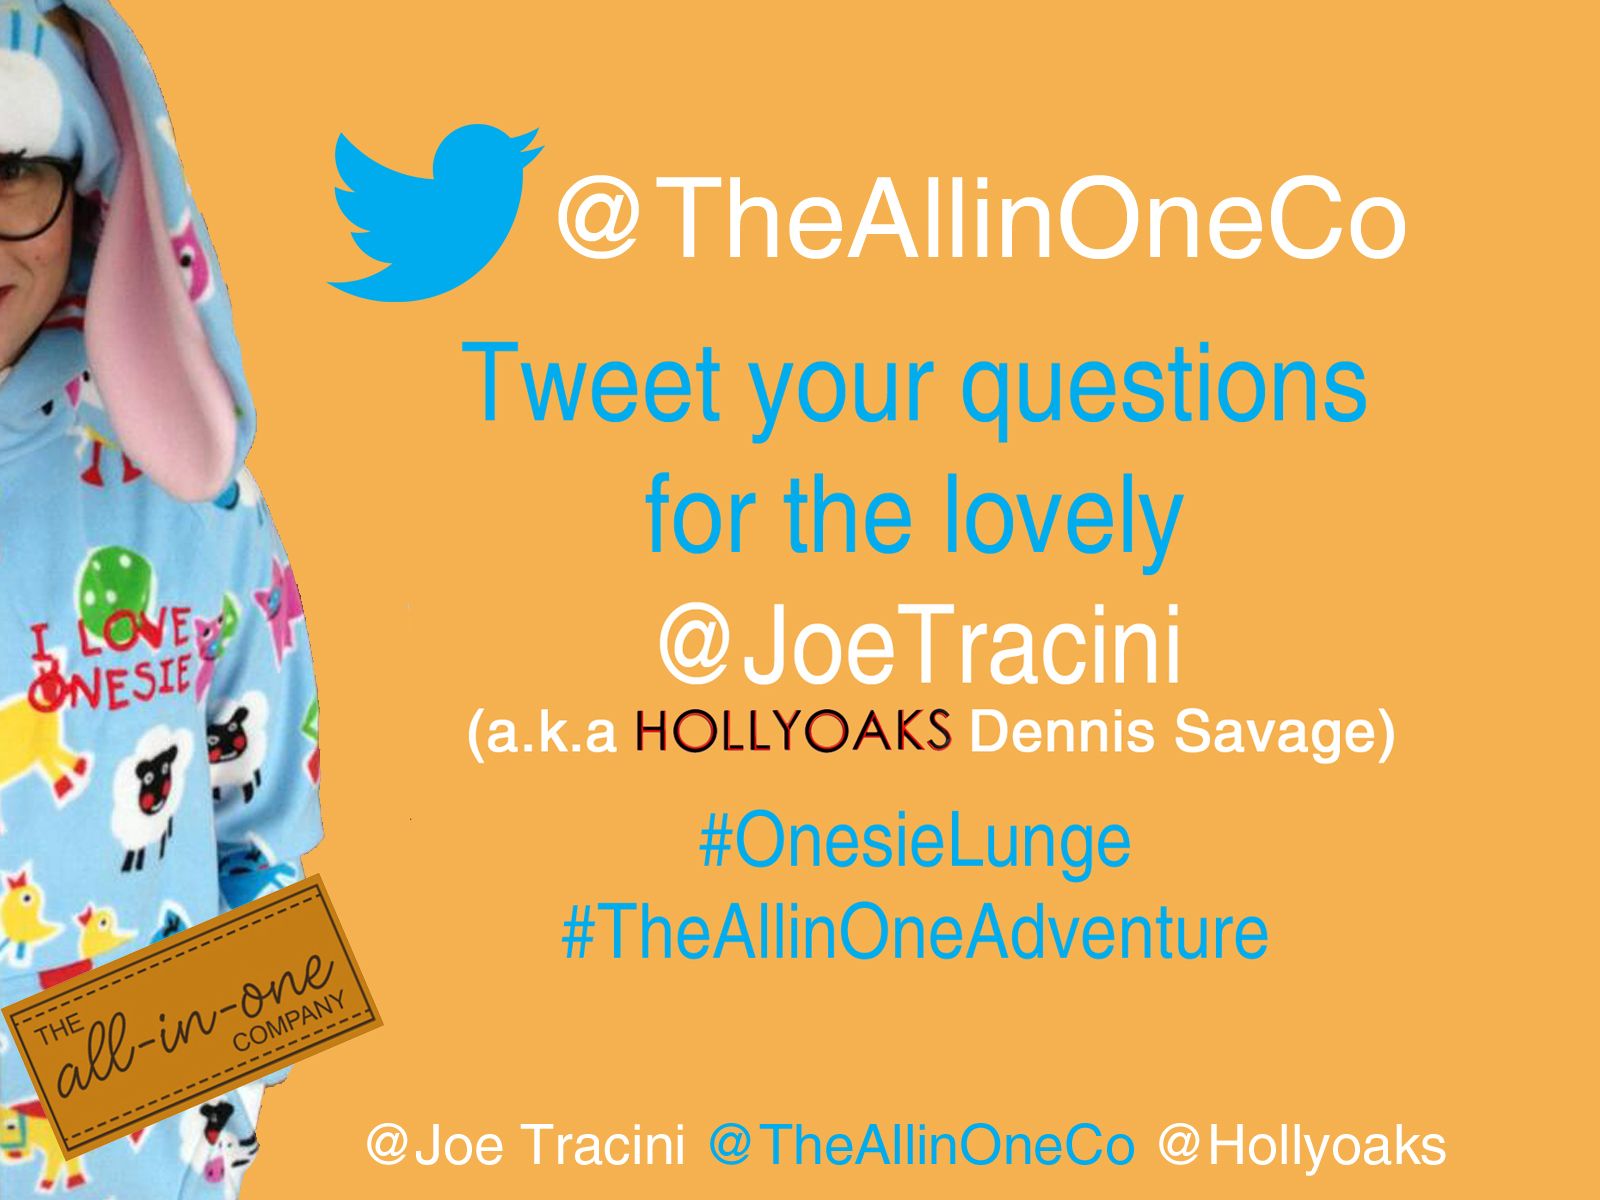 The All-in-One Adventure: Tweet your questions to the lovely Joe Tracini